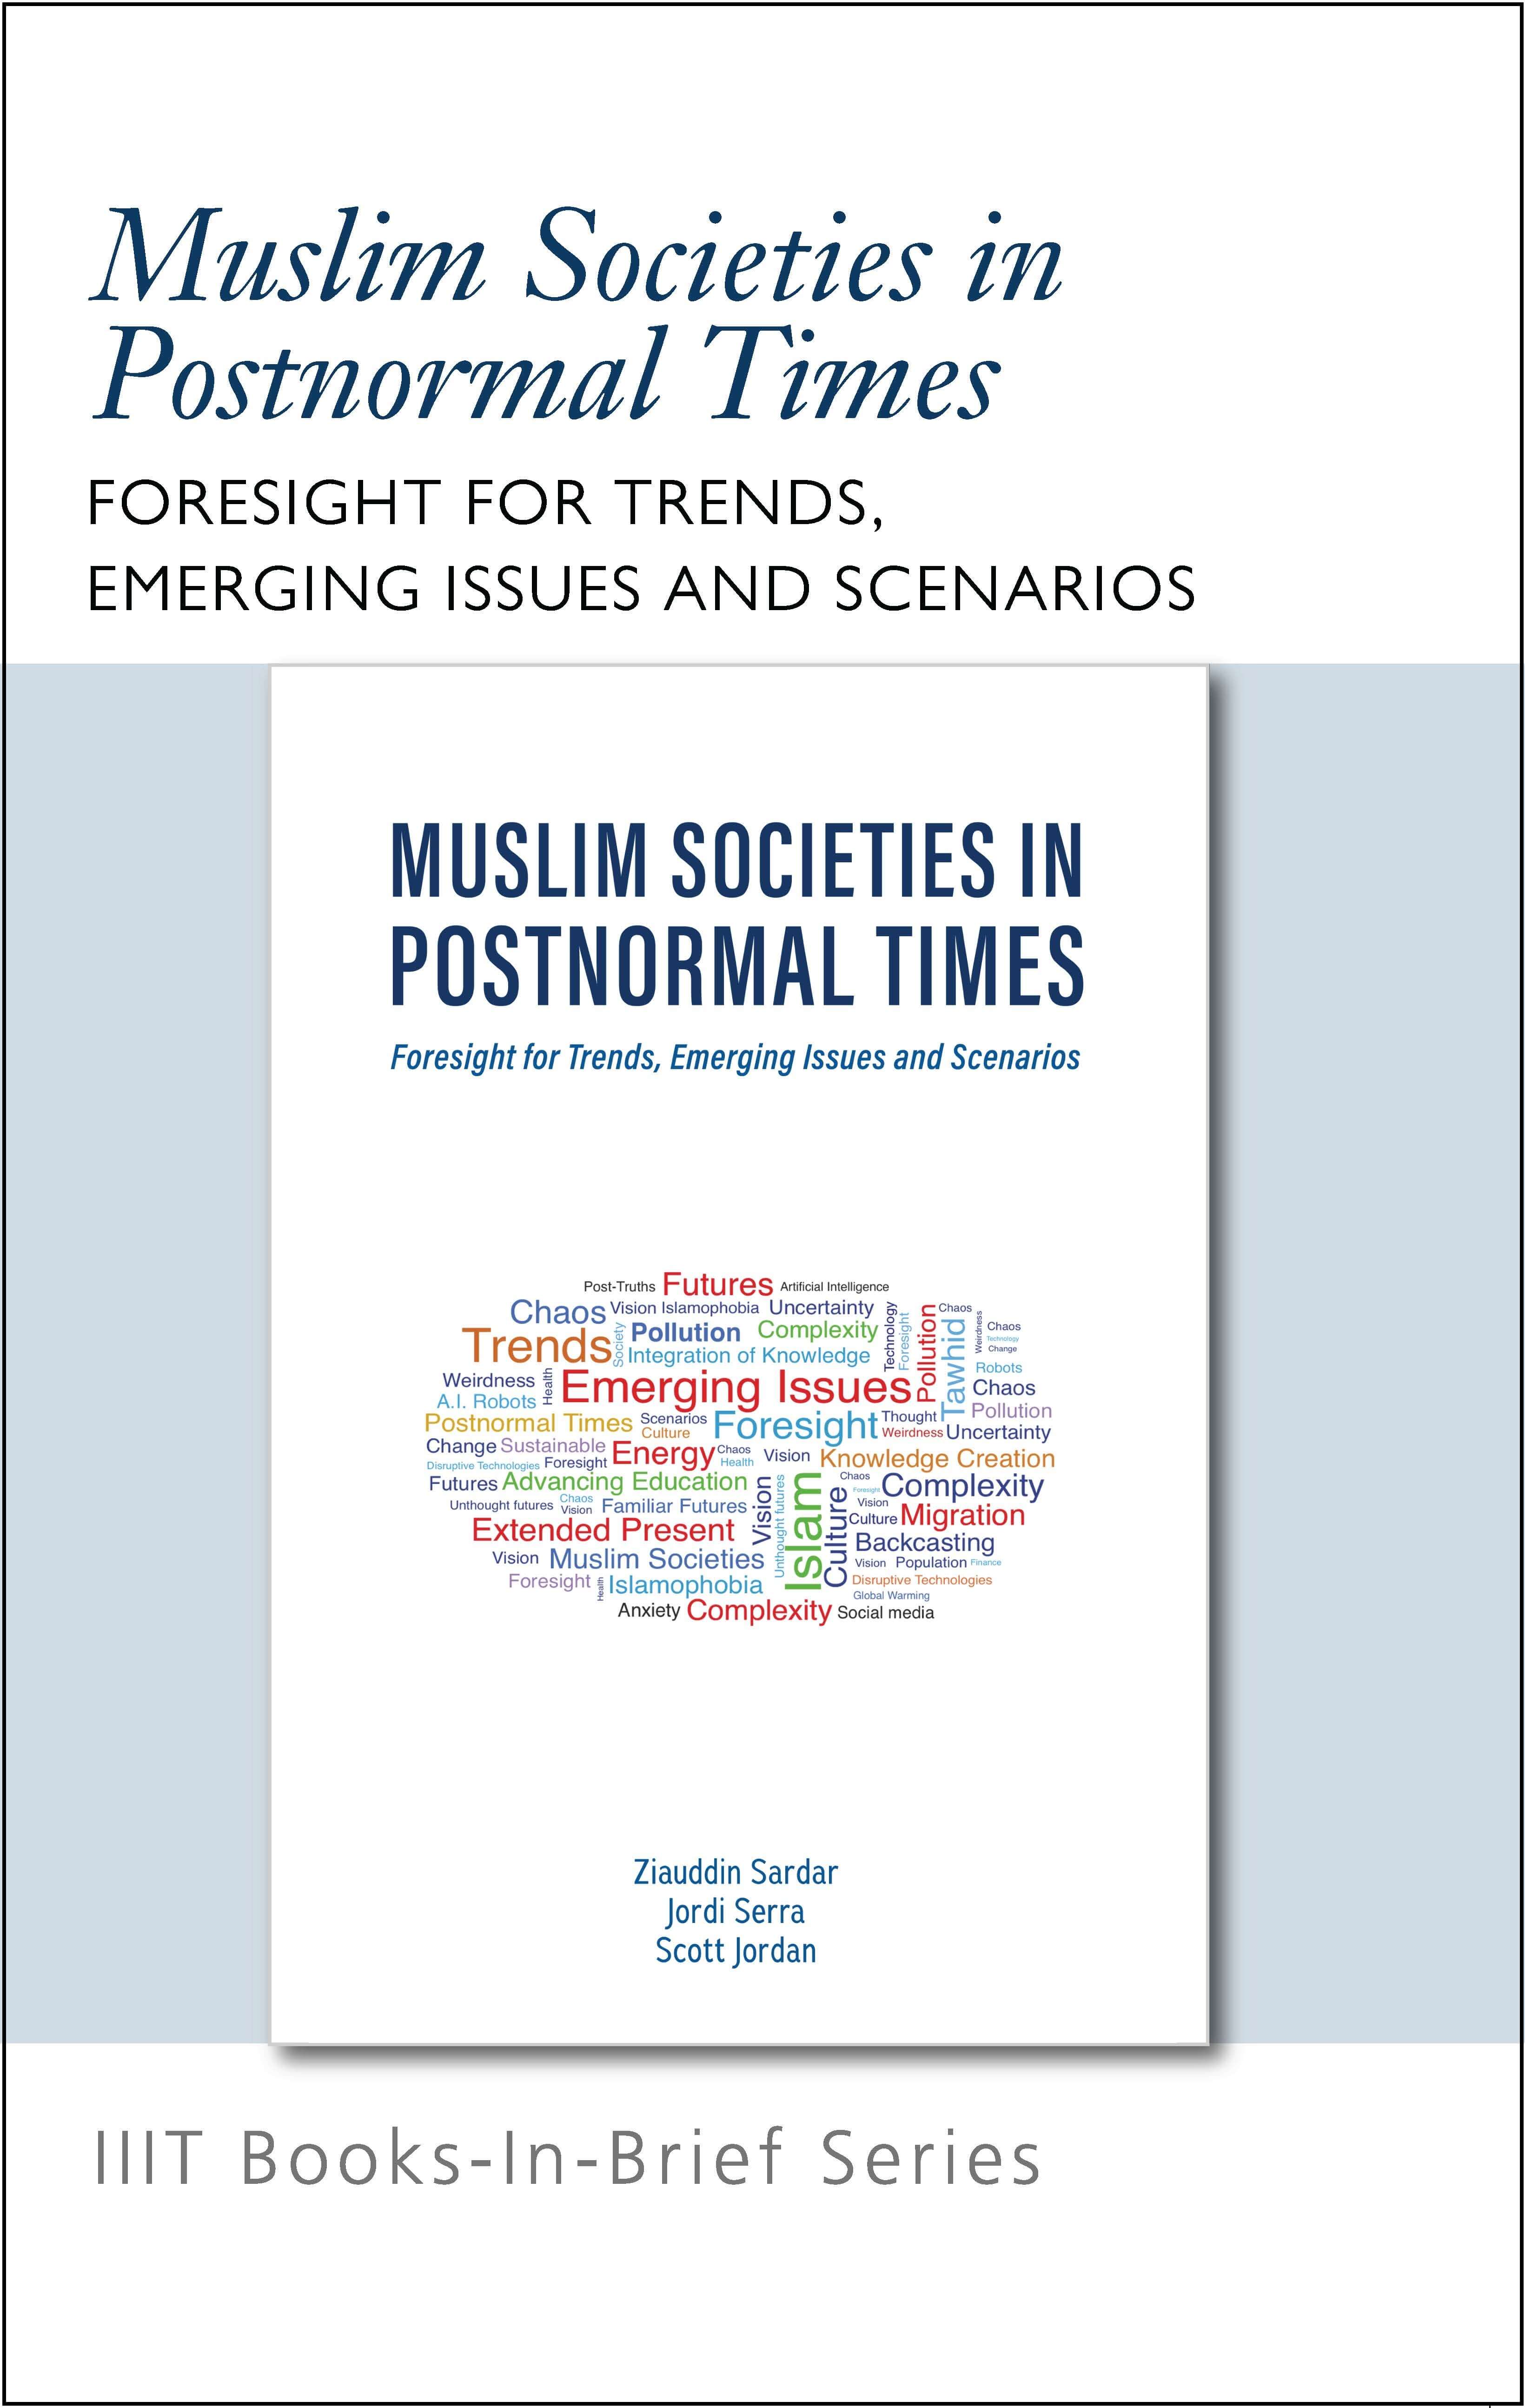 Book in Brief : Muslim Societies in Postnormal Times: Foresight for Trends, Emerging Issues and Scenarios